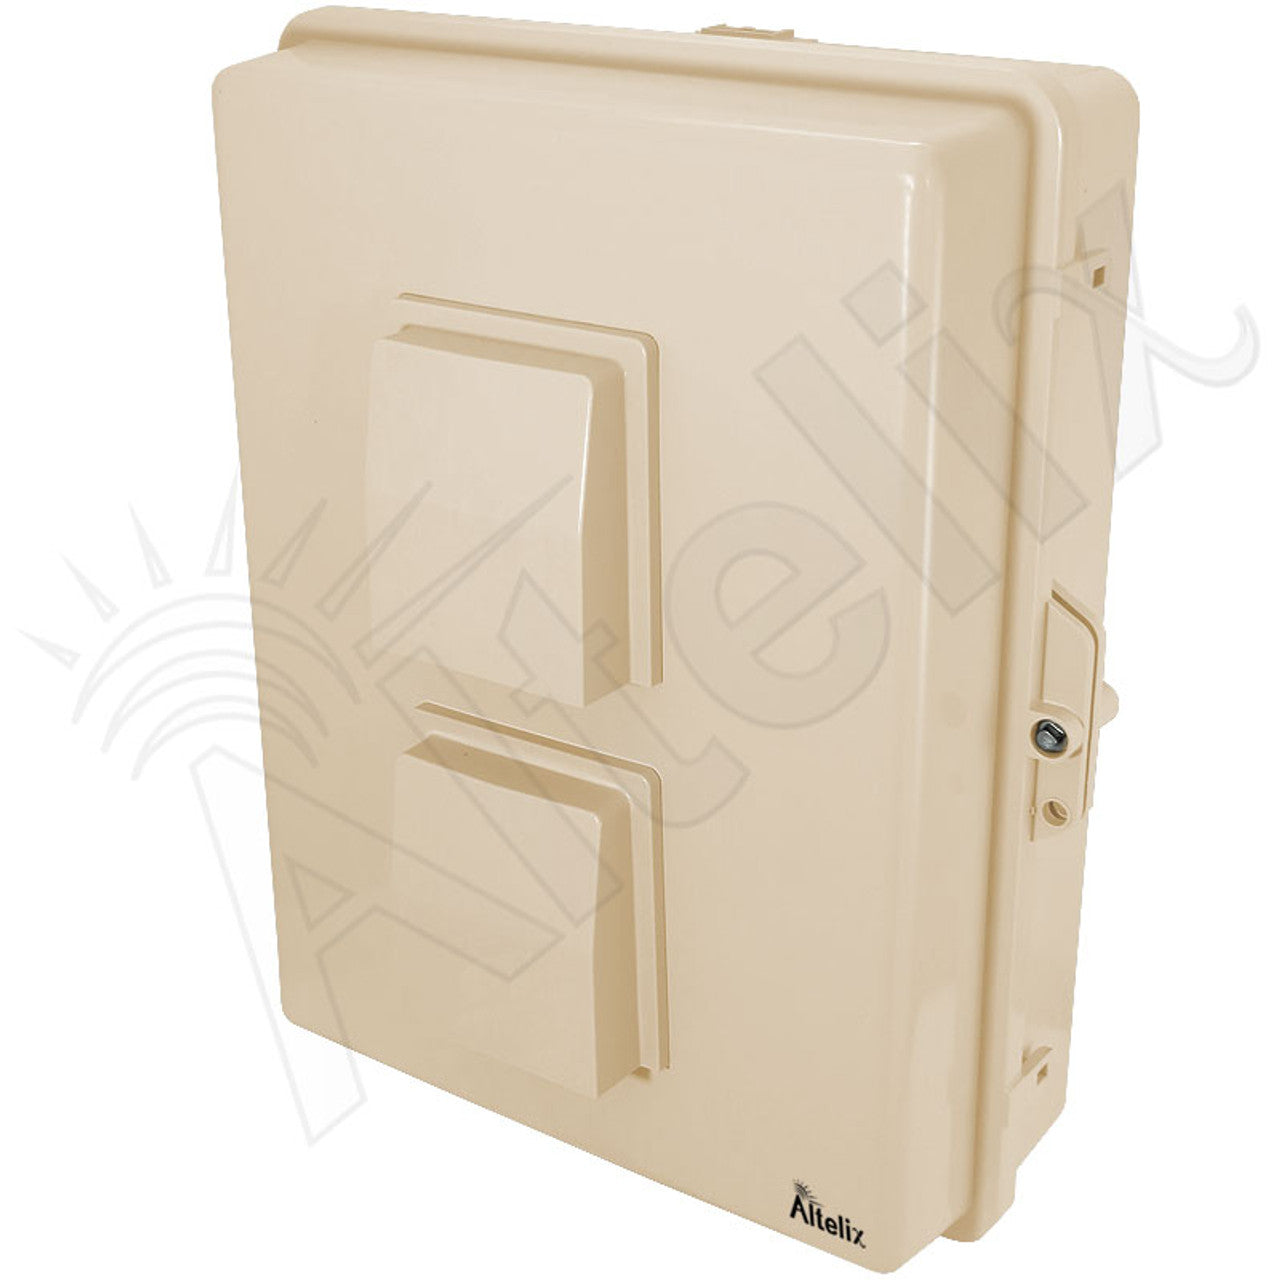 Altelix Vented Weatherproof Enclosure for TP-Link® AC1350 EAP225 V3 Access Point with 120VAC Outlets and Power Cord-5